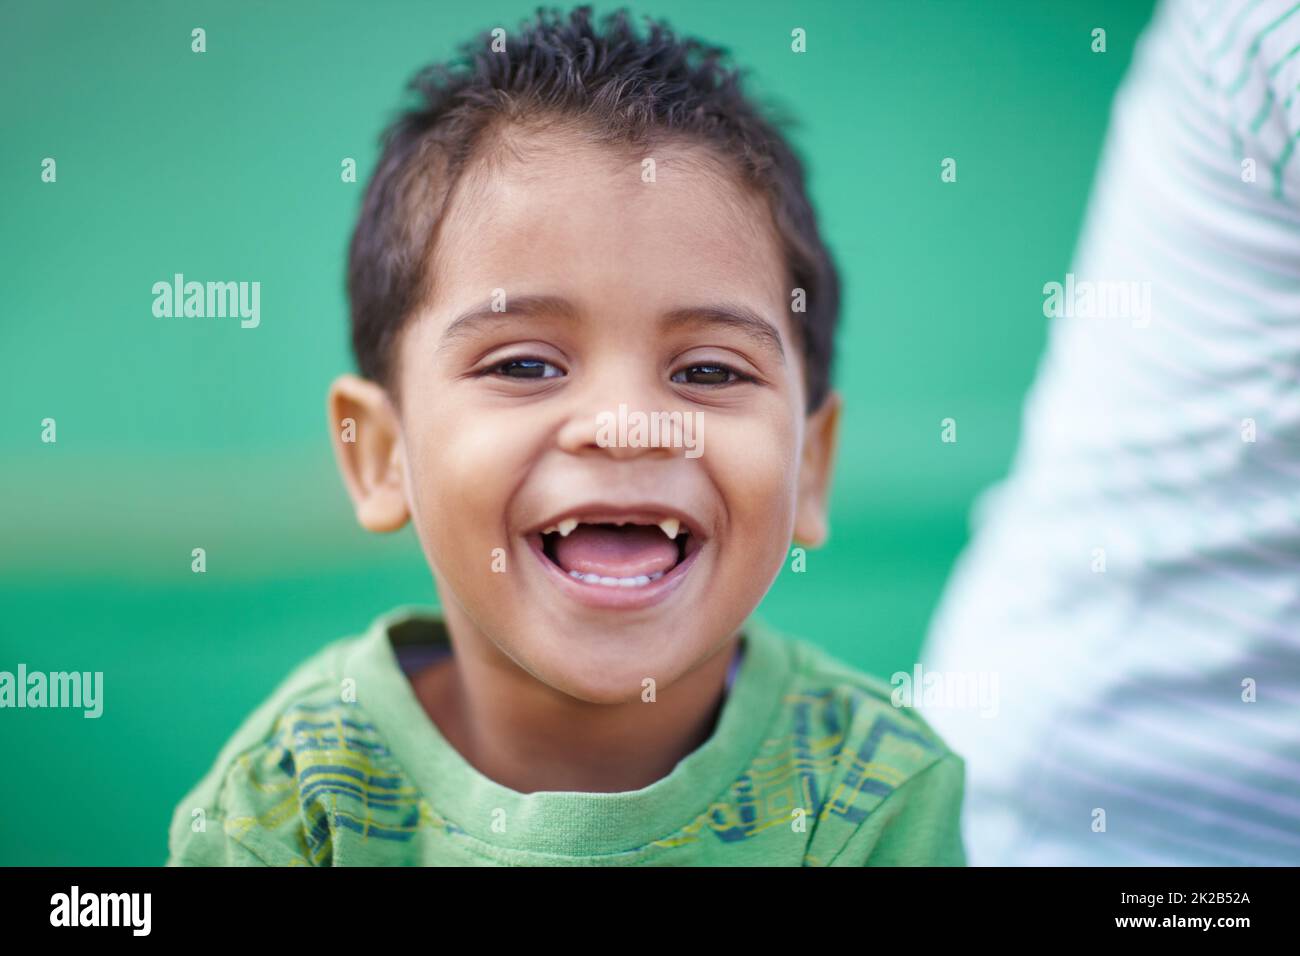 His laugh is infectious. Cute little preschooler laughing and smiling at the camera. Stock Photo